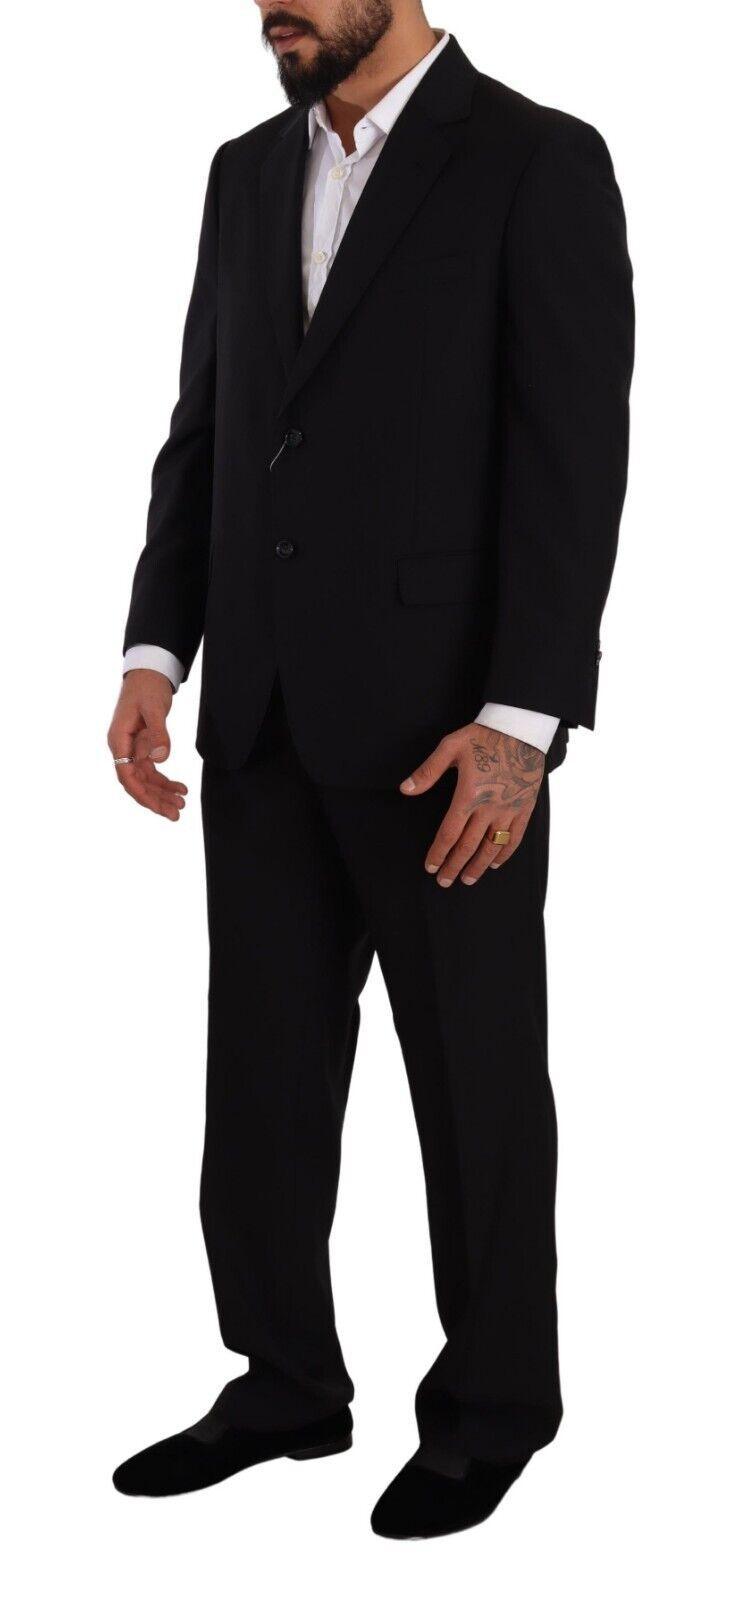 Domenico Tagliente Men's Black Polyester Single Breasted Formal Suit - Designed by Domenico Tagliente Available to Buy at a Discounted Price on Moon Behind The Hill Online Designer Discount S